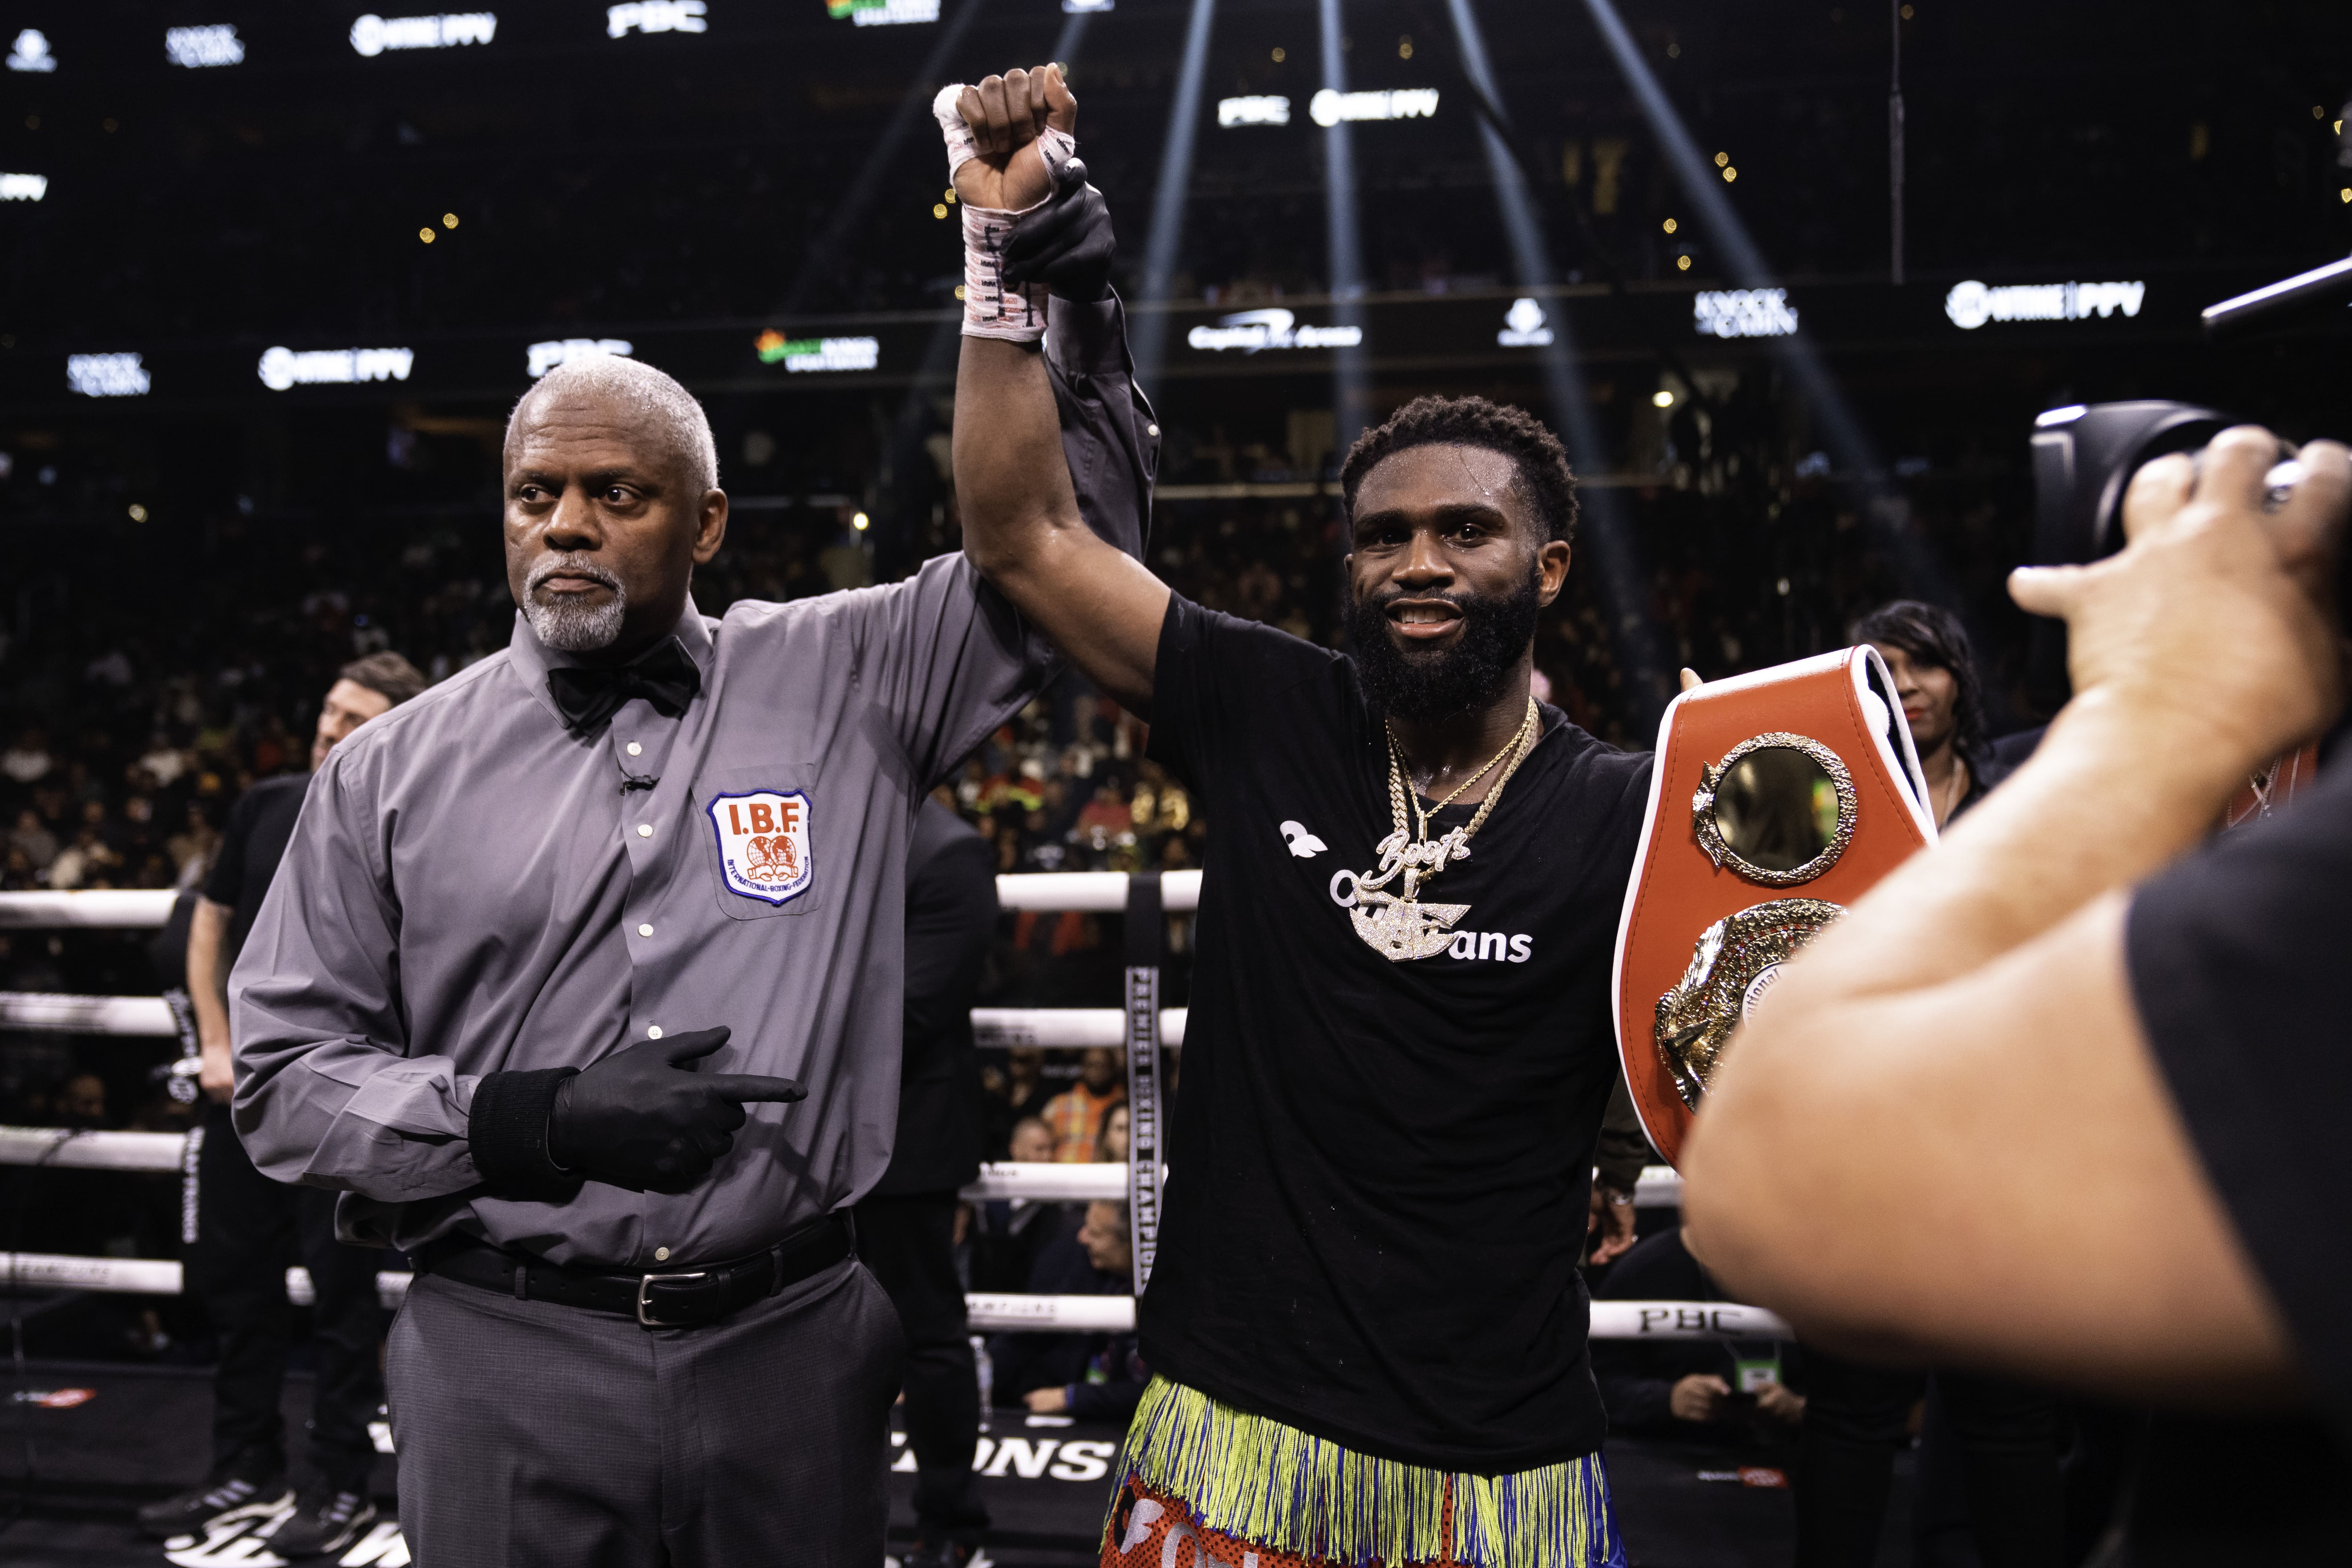 Jaron Ennis on Keith Thurman unwillingness to fight him: 'There’s nothing else I can do. I get tired of hearing his name.'